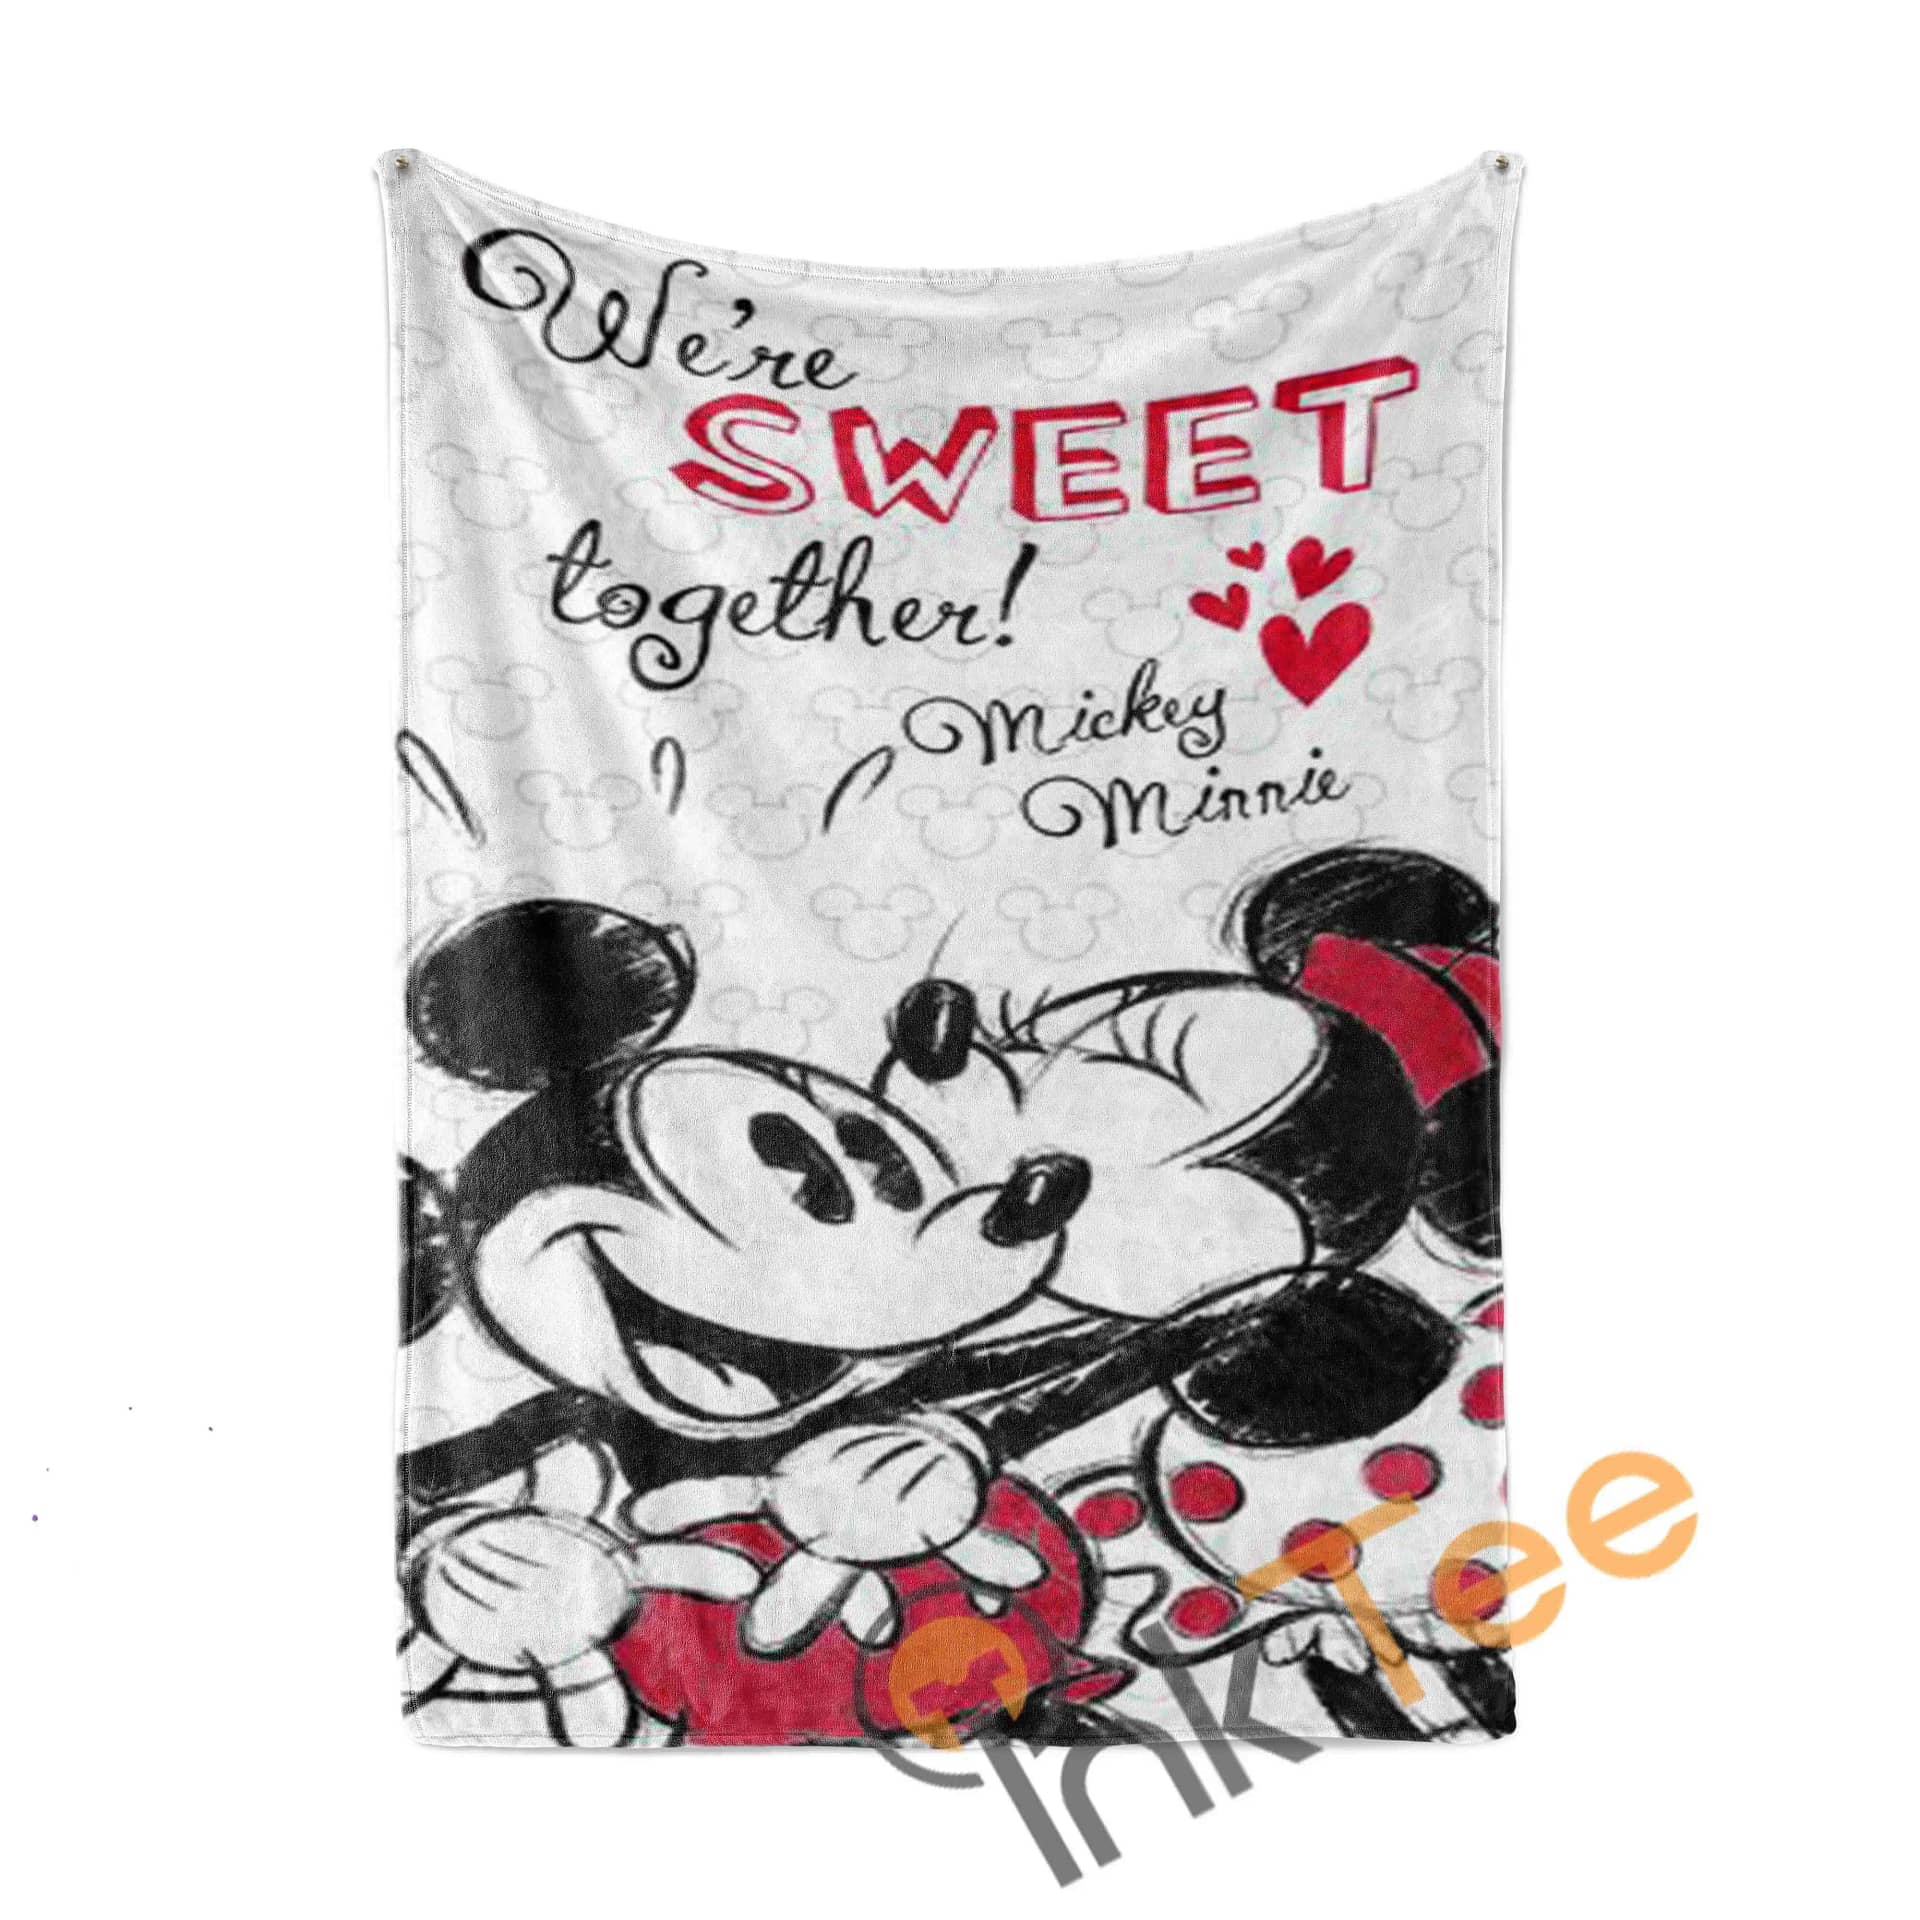 We'Re Sweet Together Minnie And Mickey Mouse Area Amazon Best Seller 5000 Fleece Blanket